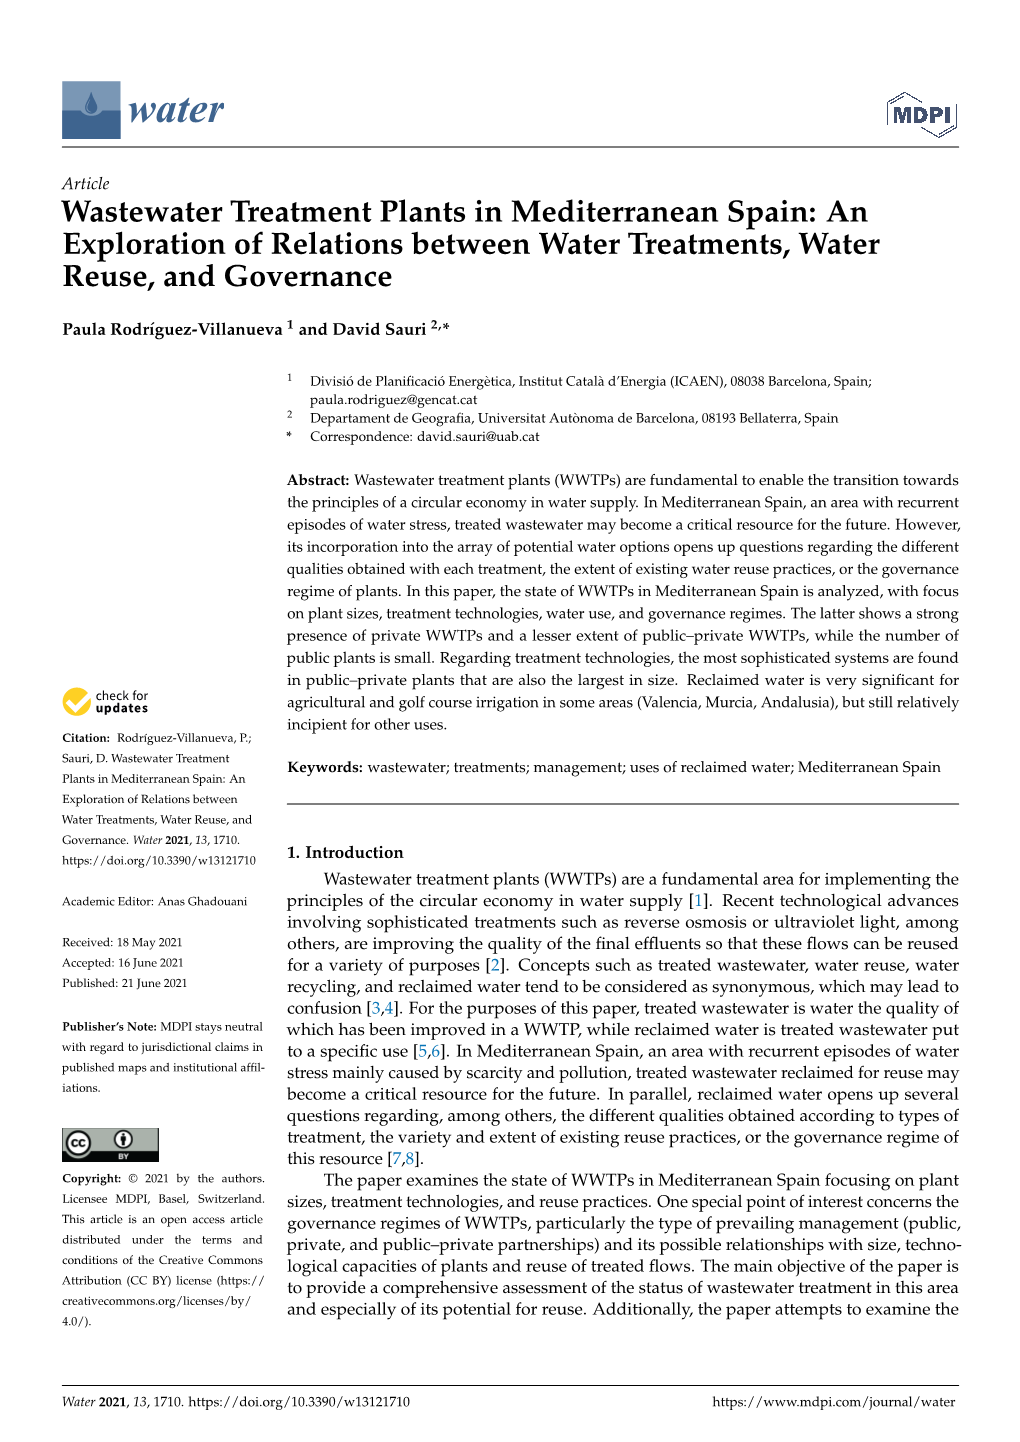 Wastewater Treatment Plants in Mediterranean Spain: an Exploration of Relations Between Water Treatments, Water Reuse, and Governance